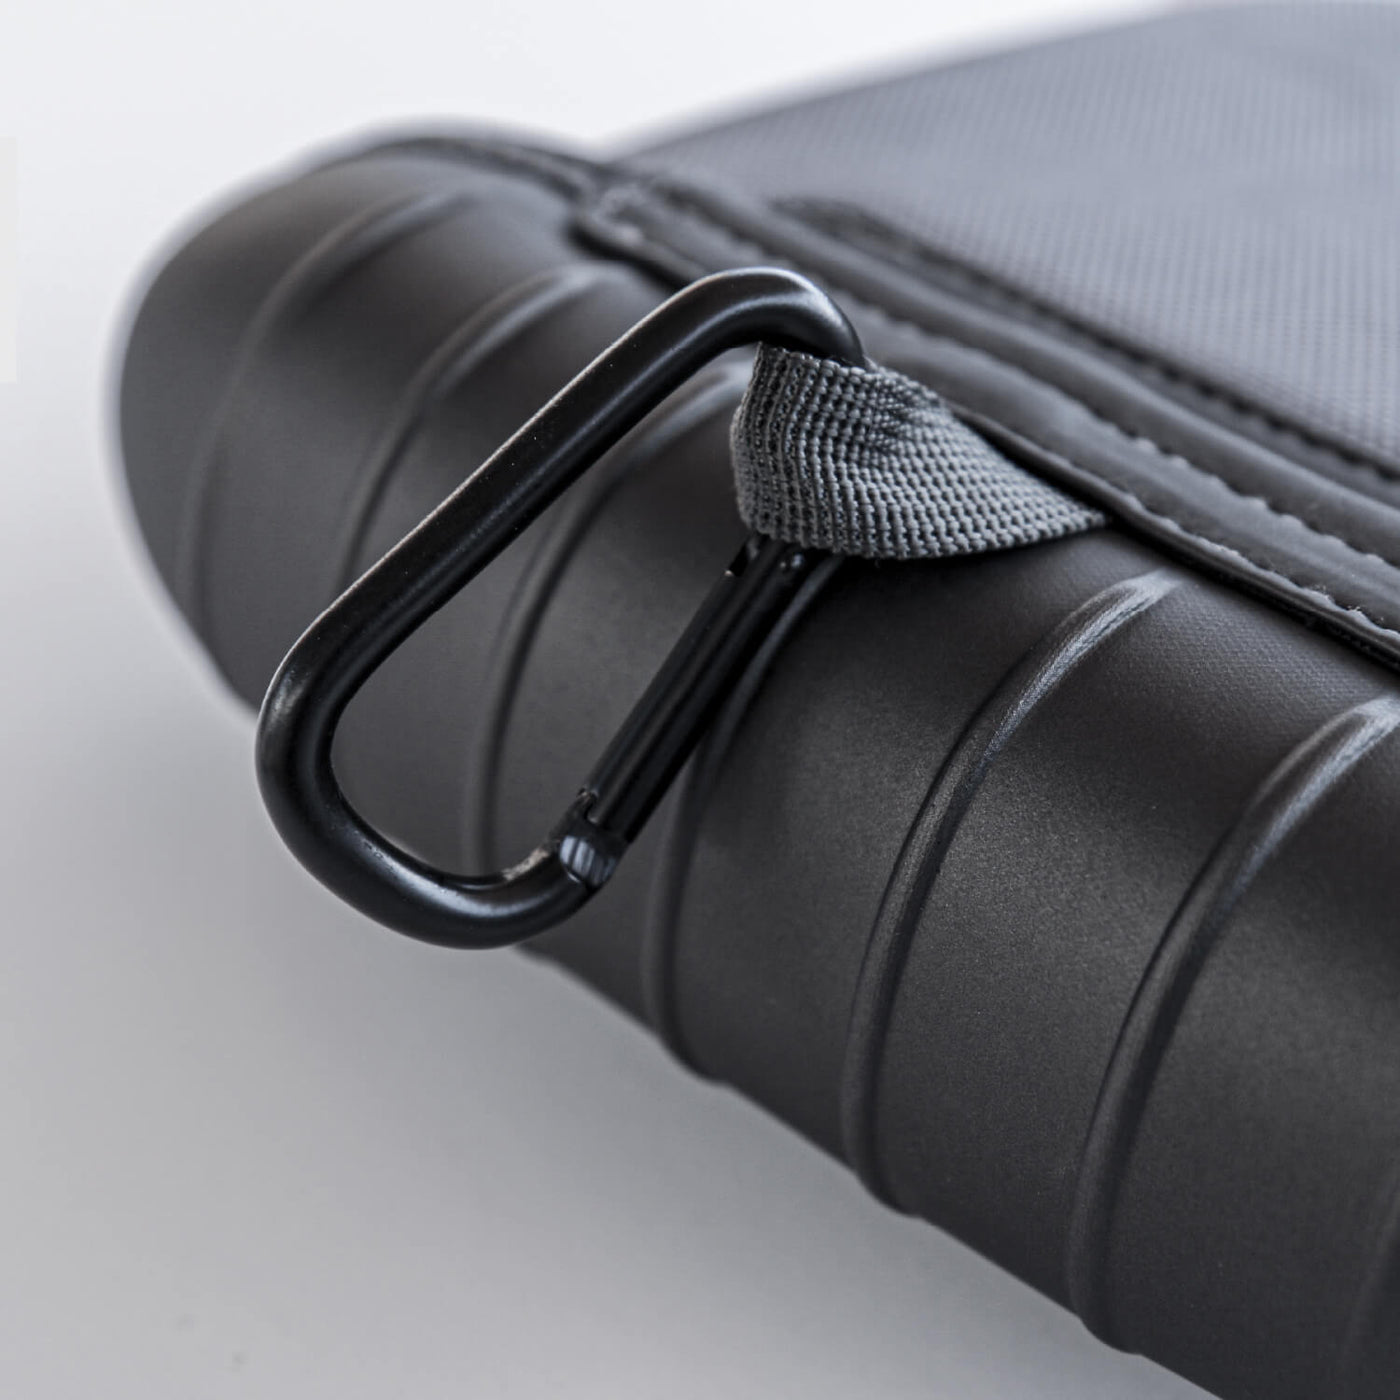 Close up of the back of Smarform Case showing the loop with a black carabiner attached.